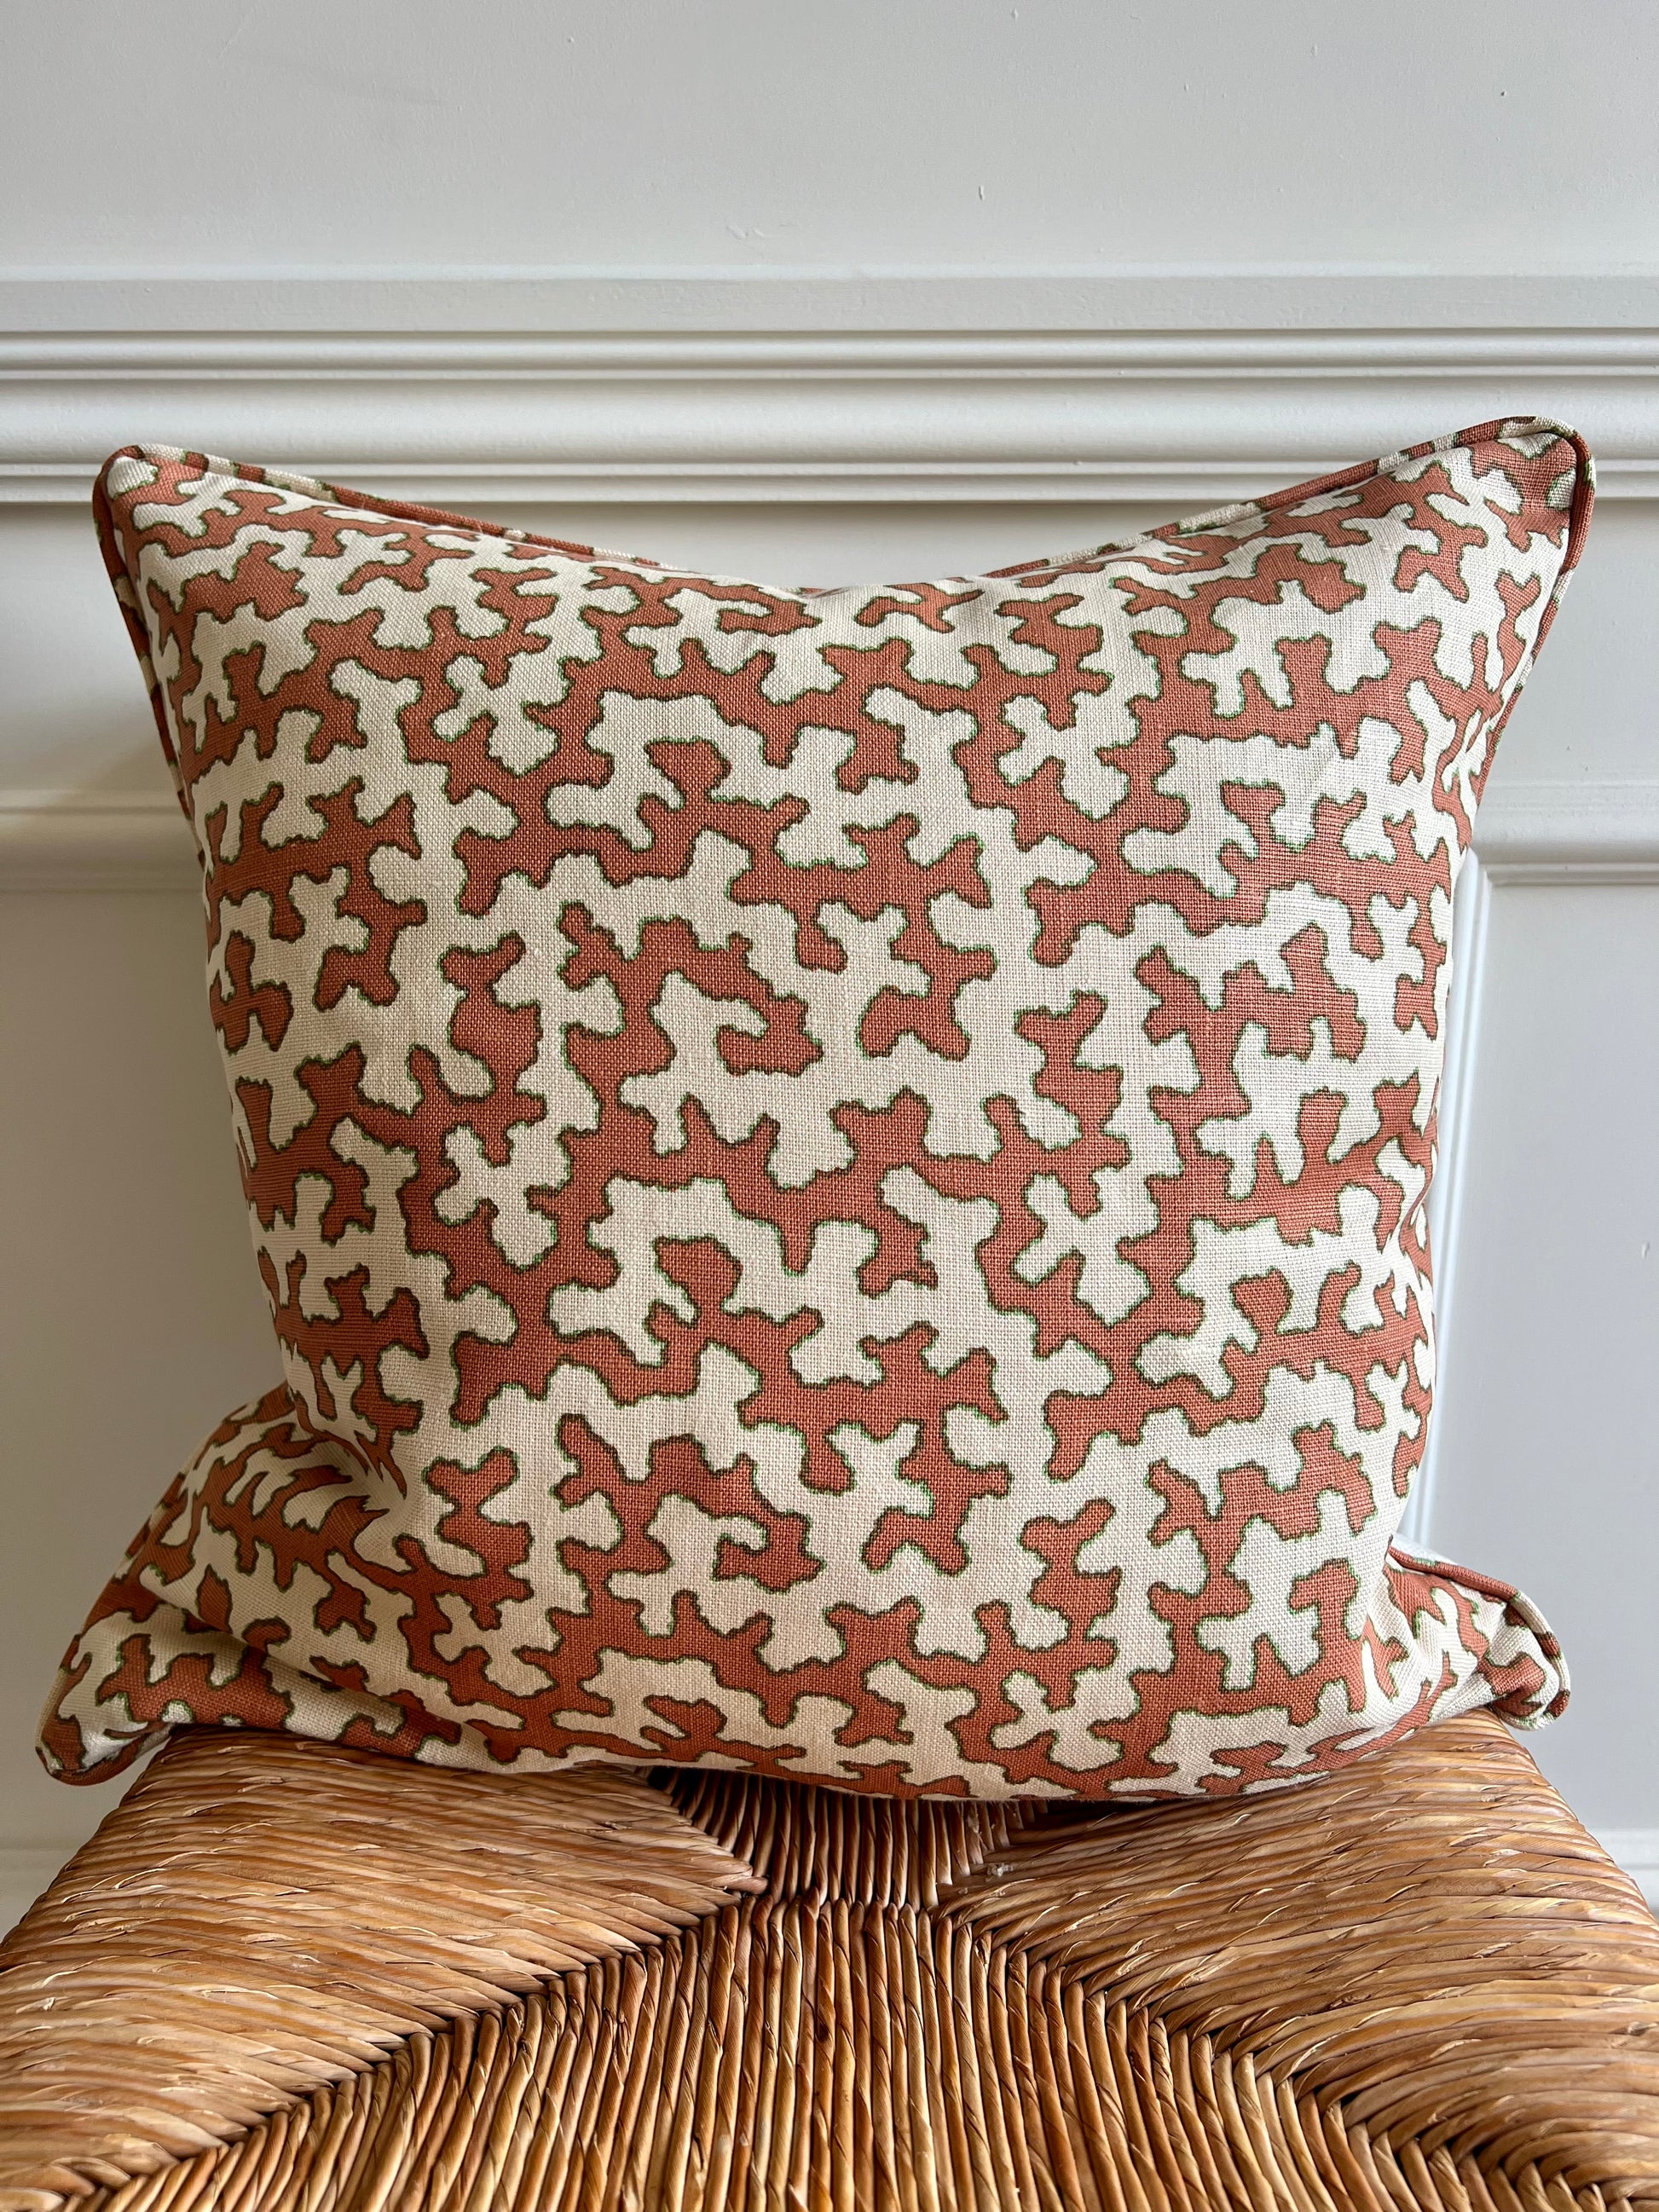 Colefax Fowler Cushions - Luxury cushions in Sibyl Colefax John Fowler Fabric (Apricot Squiggle) 